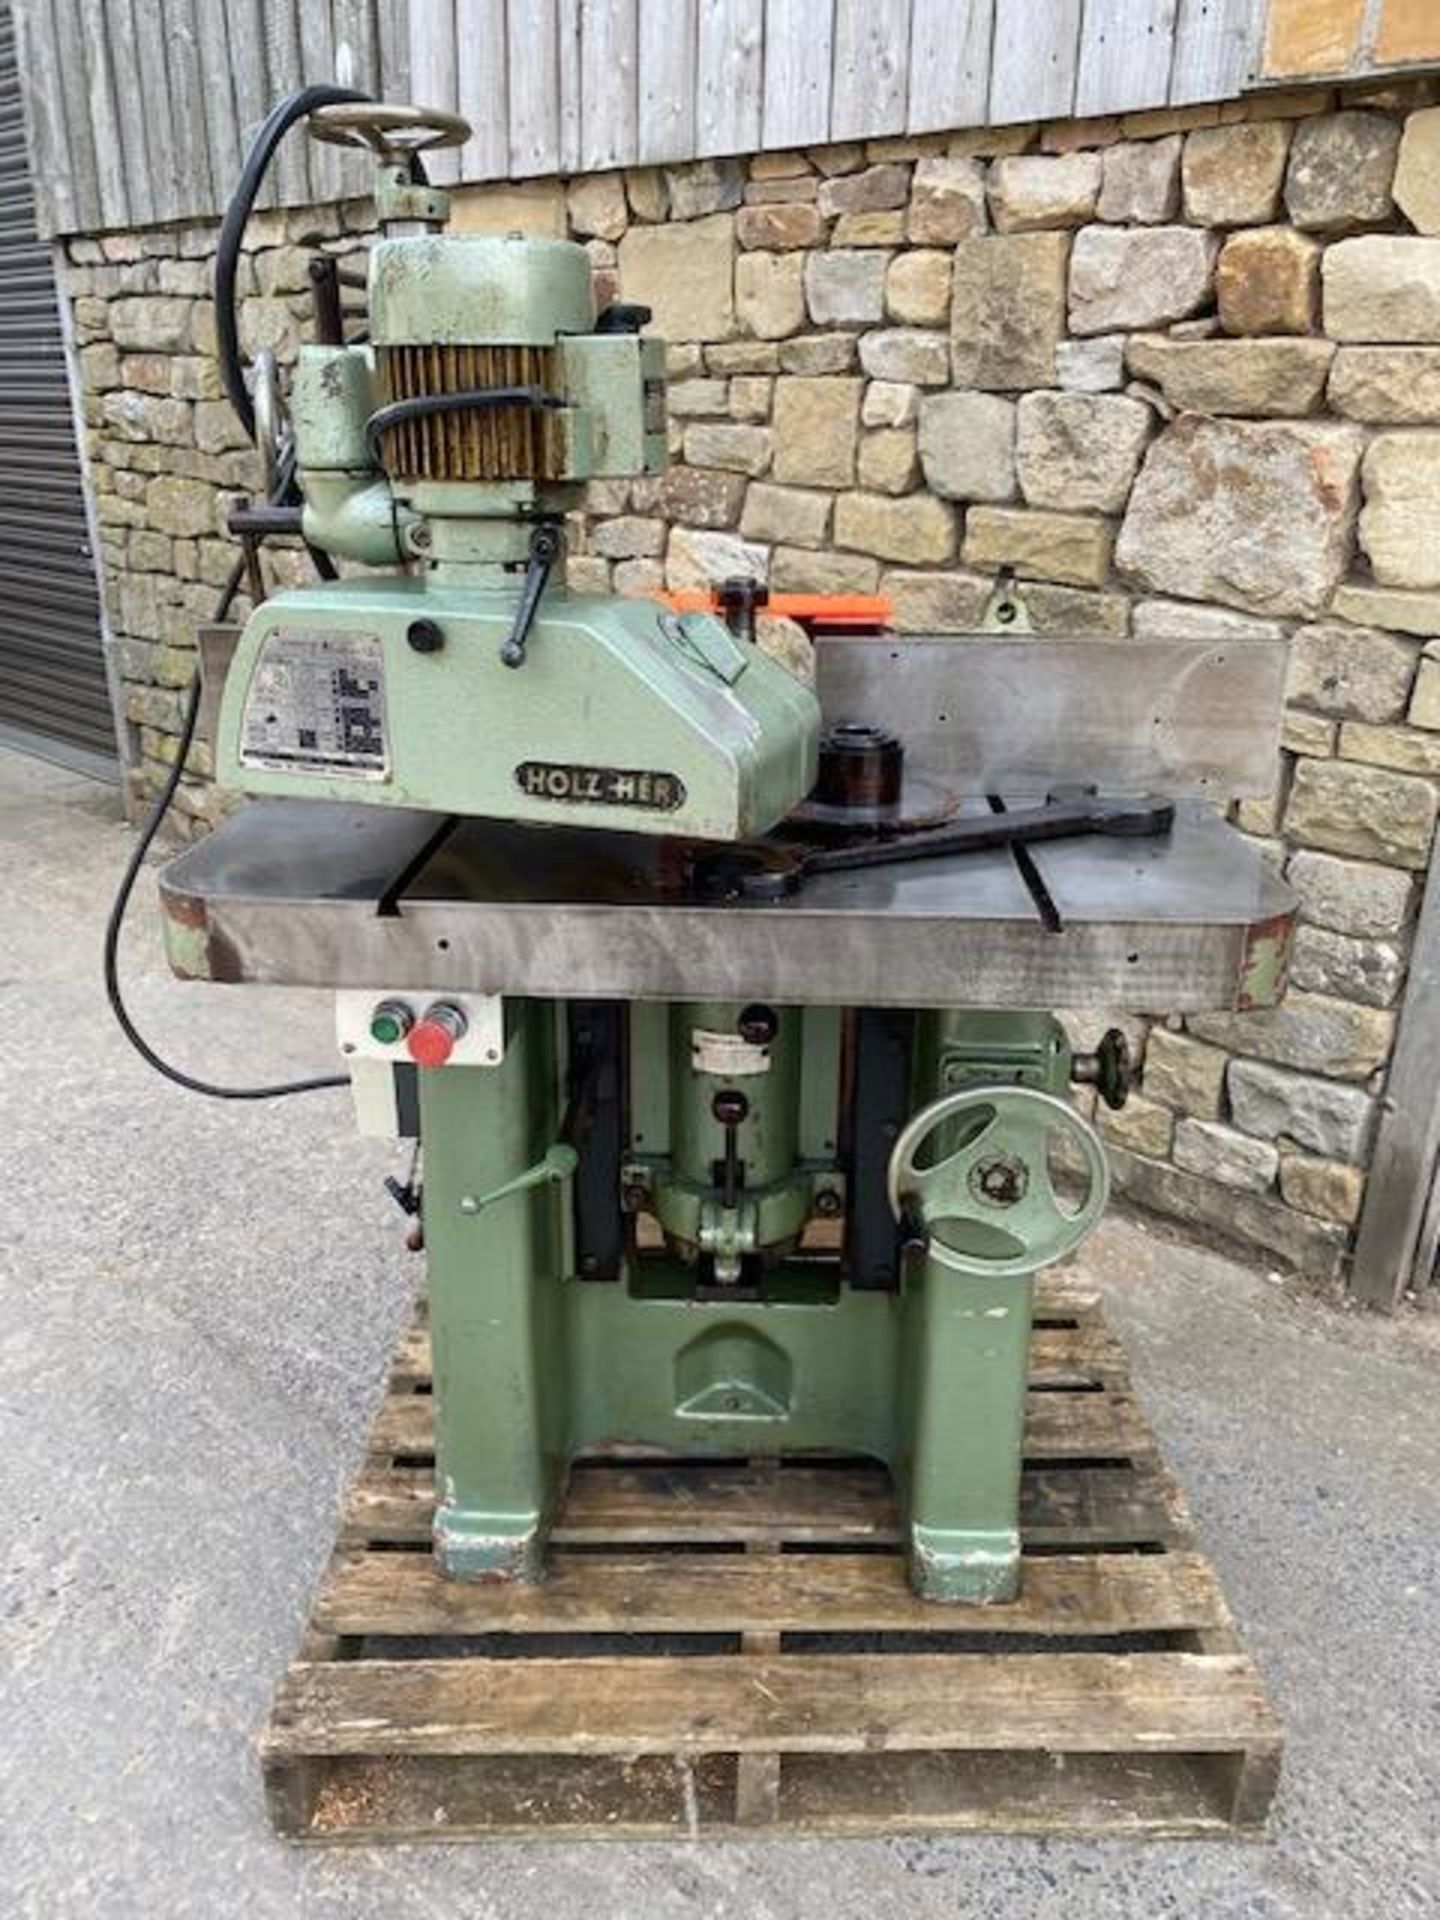 Wadkin EQ Spindle Moulder, serial no. EQ3524, with Holzher power feed unitPlease read the